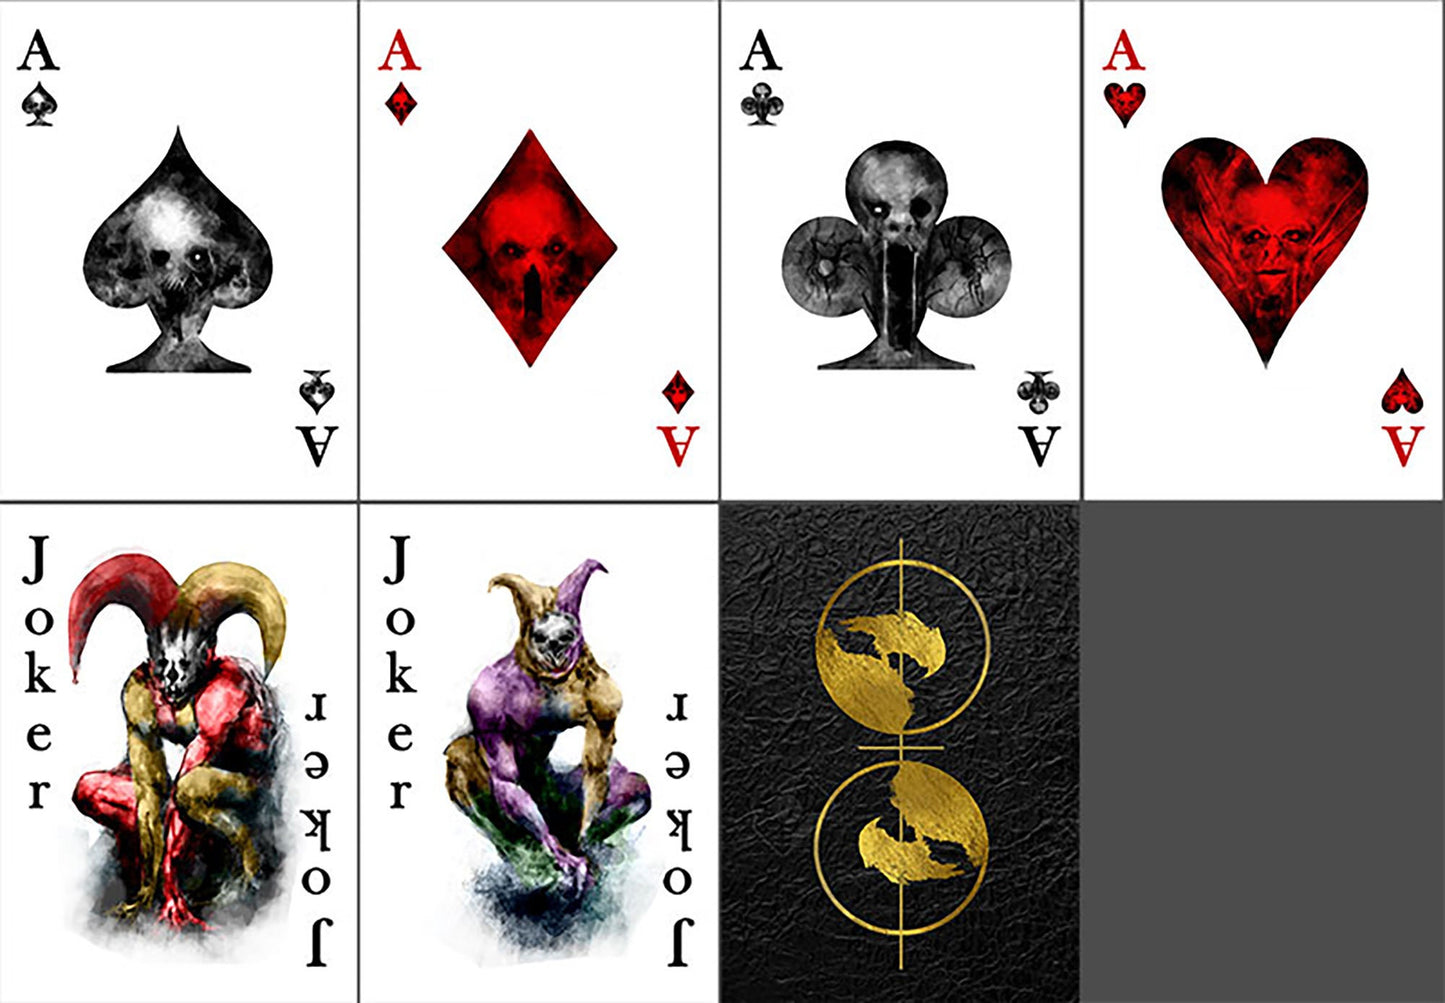 War of Corruption Casino Quality Linen Playing Cards with Downloadable PDF